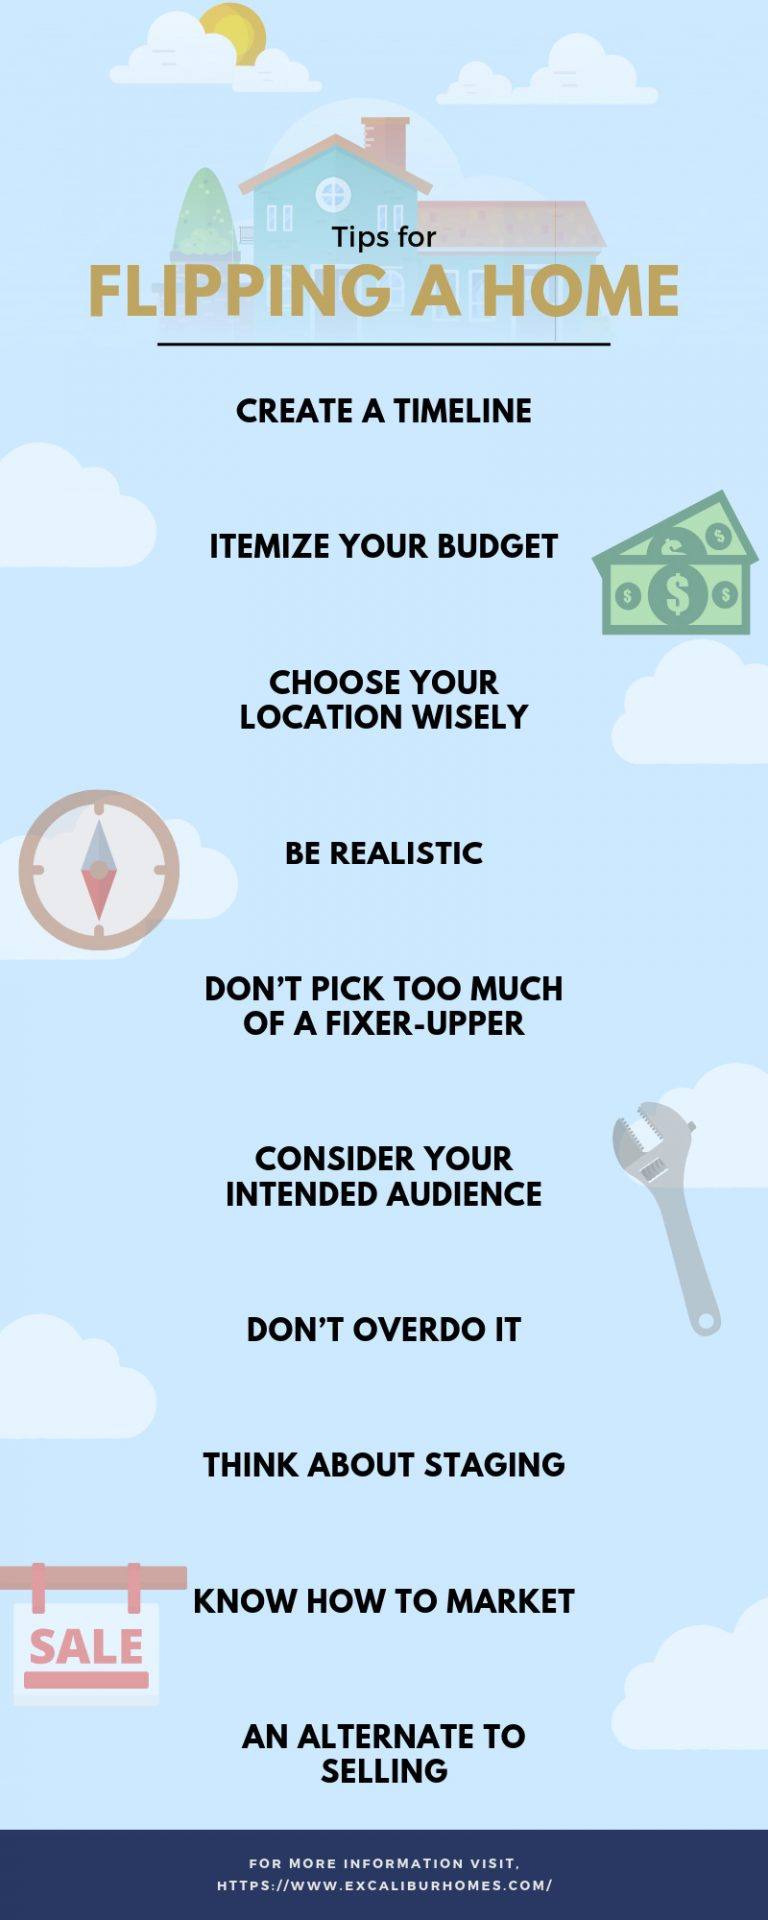 Tips for Flipping a Home infographic